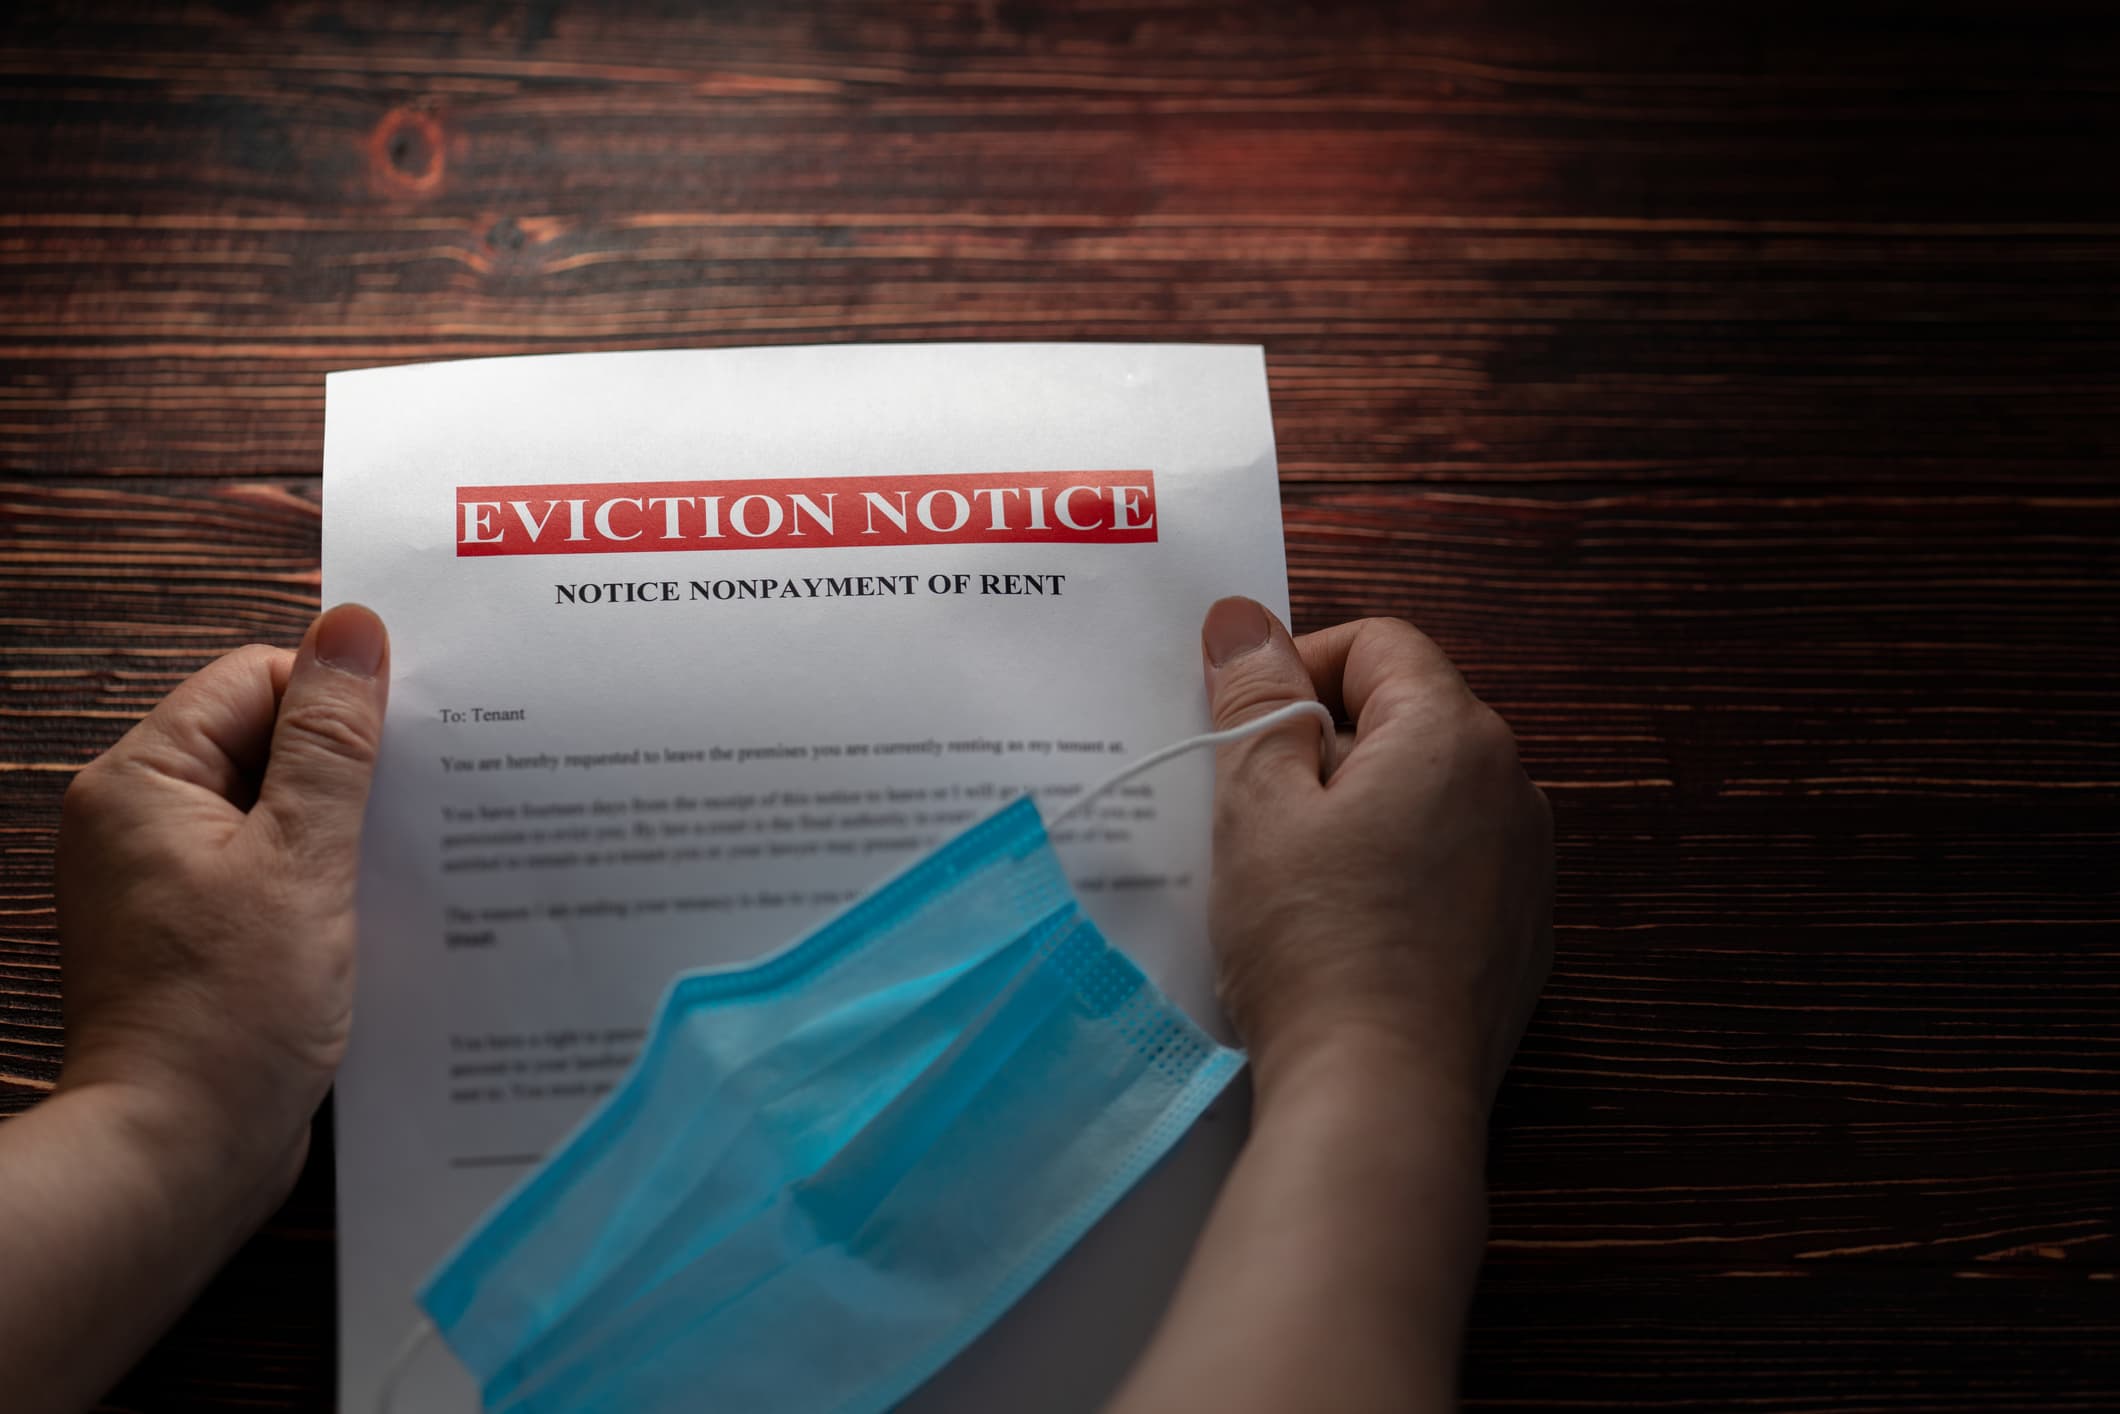 The national ban on evictions expires today. Here’s who’s most at risk